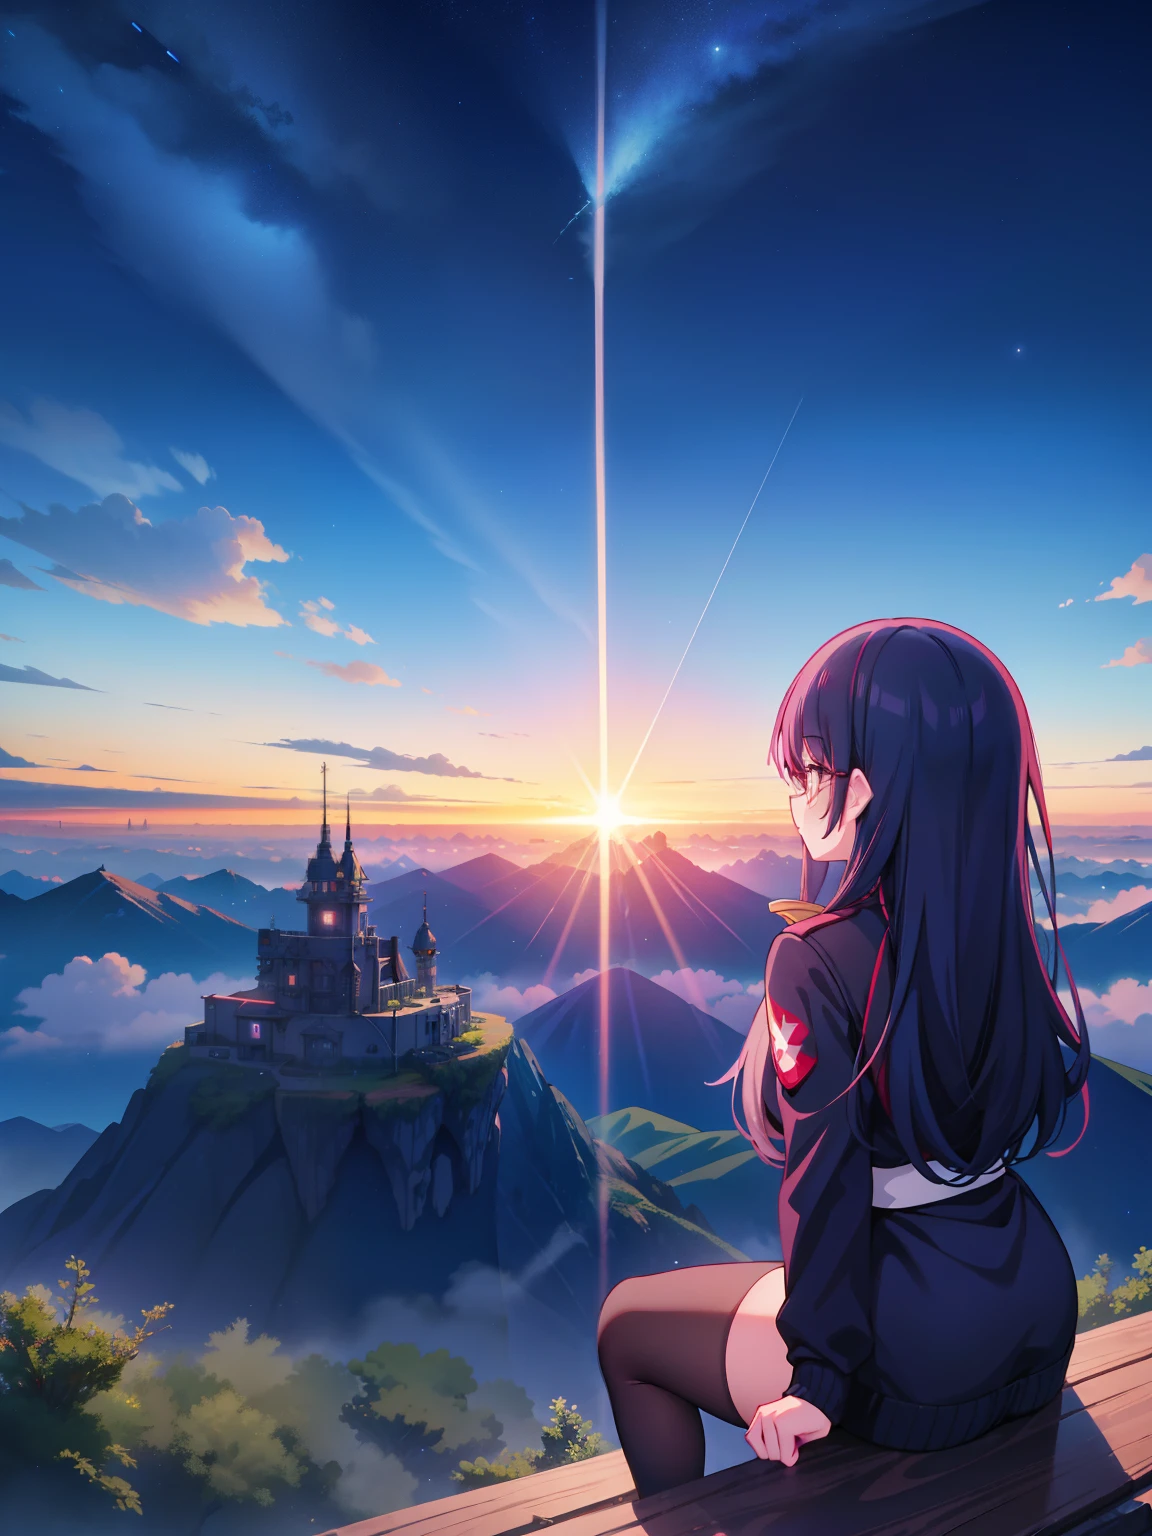 shinkai Mokoto and Ghibli anime style, from behind,above the cloudthree girls and a boy are standing in front of a night sky, girls frontline universe, guweiz on pixiv artstation, girls frontline cg, 4 k manga wallpaper, artwork in the style of guweiz, best anime 4k konachan wallpaper, kantai collection style, guweiz on artstation pixiv, guweiz, girls frontline style
l in adventure outfit sitting on a mossy stage looking at the majestic lost city and the giant world tree next to it, lost city above the cloud and towering sky, magical glowing partical, vibrant dreamy colorful sky and fluffy clouds, books, apple, glasses, calm,petal,wind blowing hair,sun shine